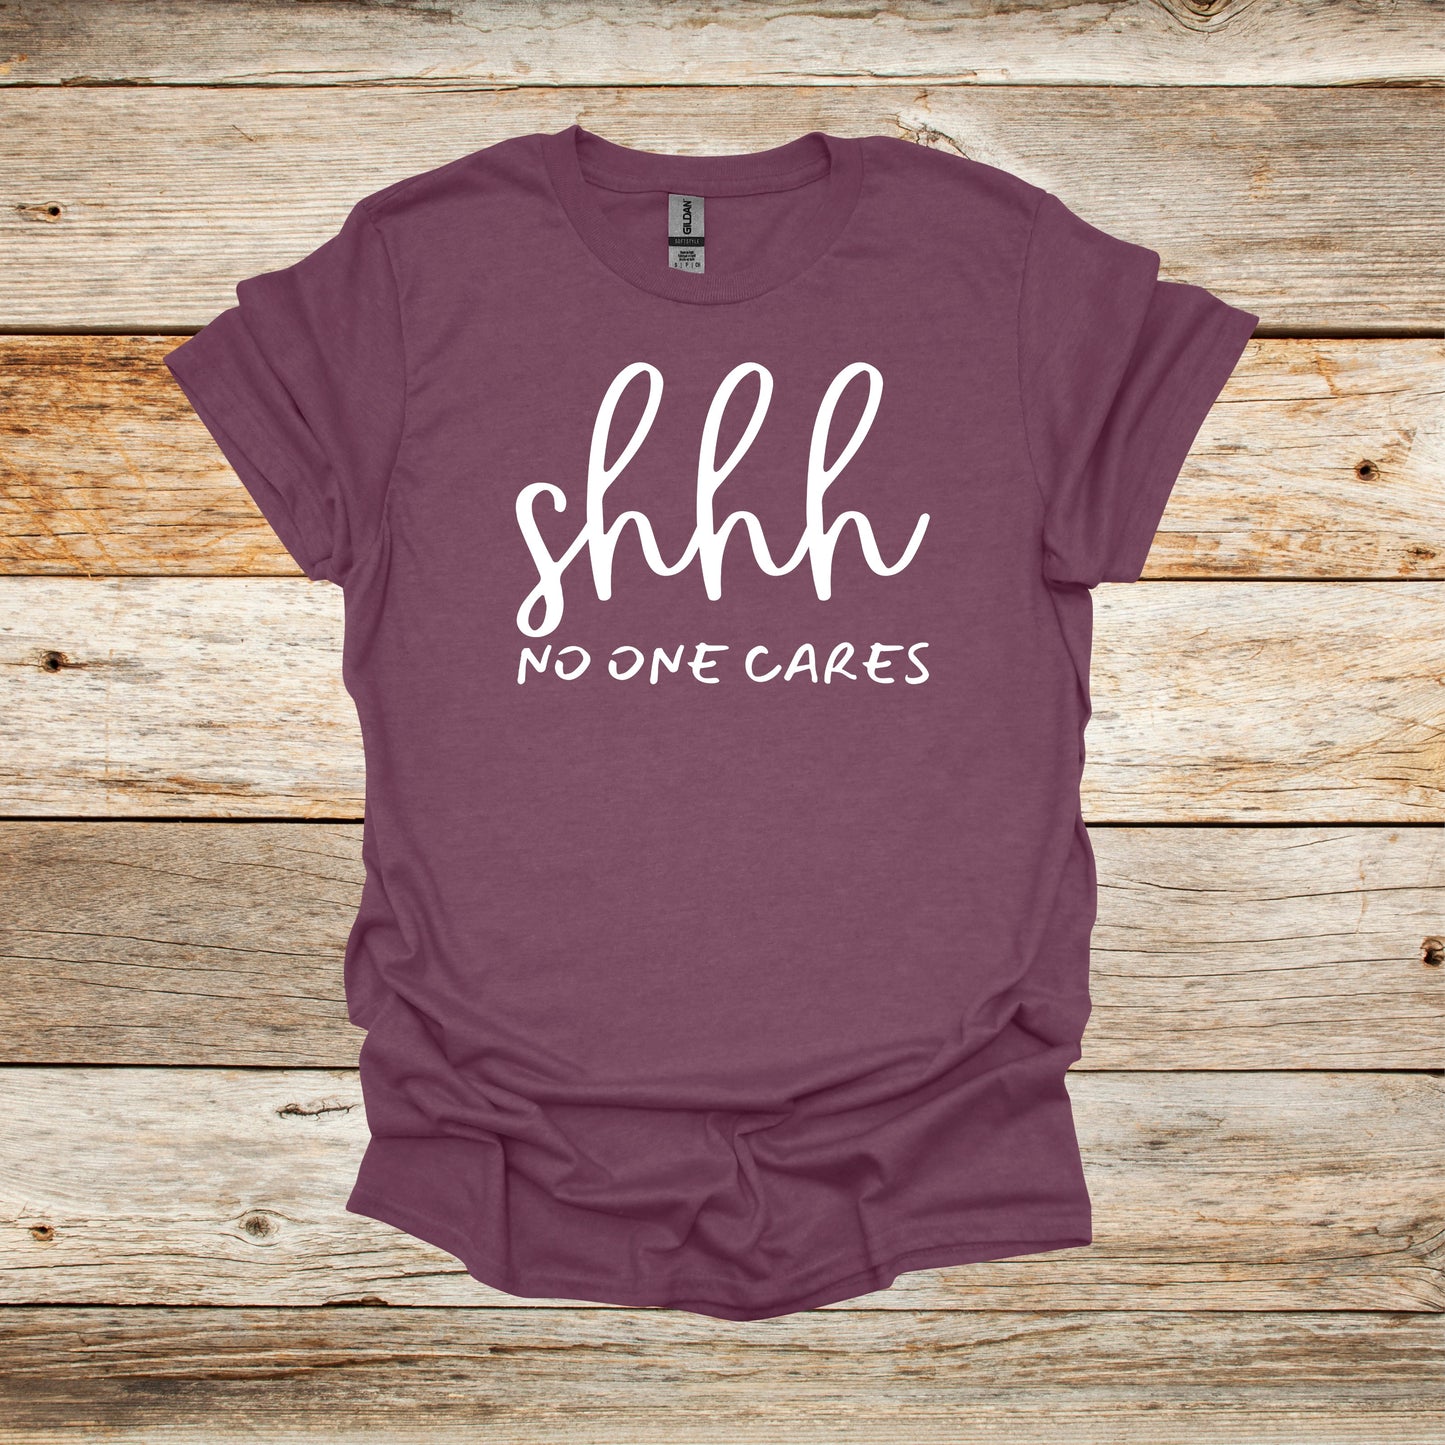 Sayings T-Shirt -Shhh No One Cares - Men's and Women's Tee Shirts - Sayings T-Shirts Graphic Avenue Heather Maroon Adult Small 